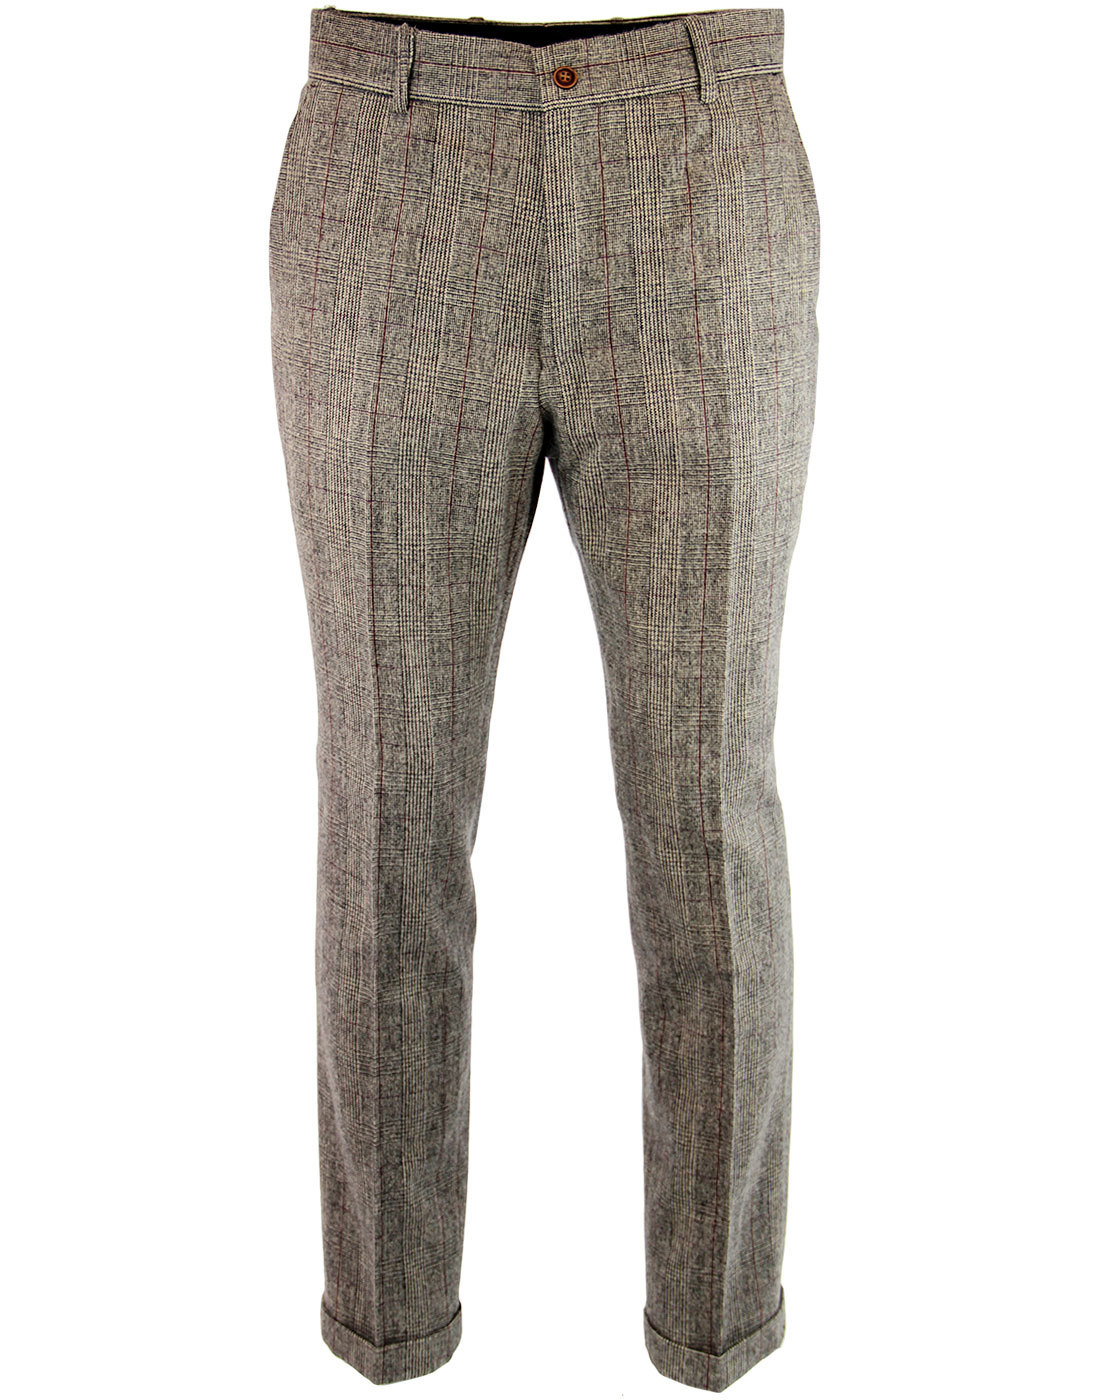 GIBSON LONDON Retro 1960s Mod POW Check Turn Up Trousers in Taupe